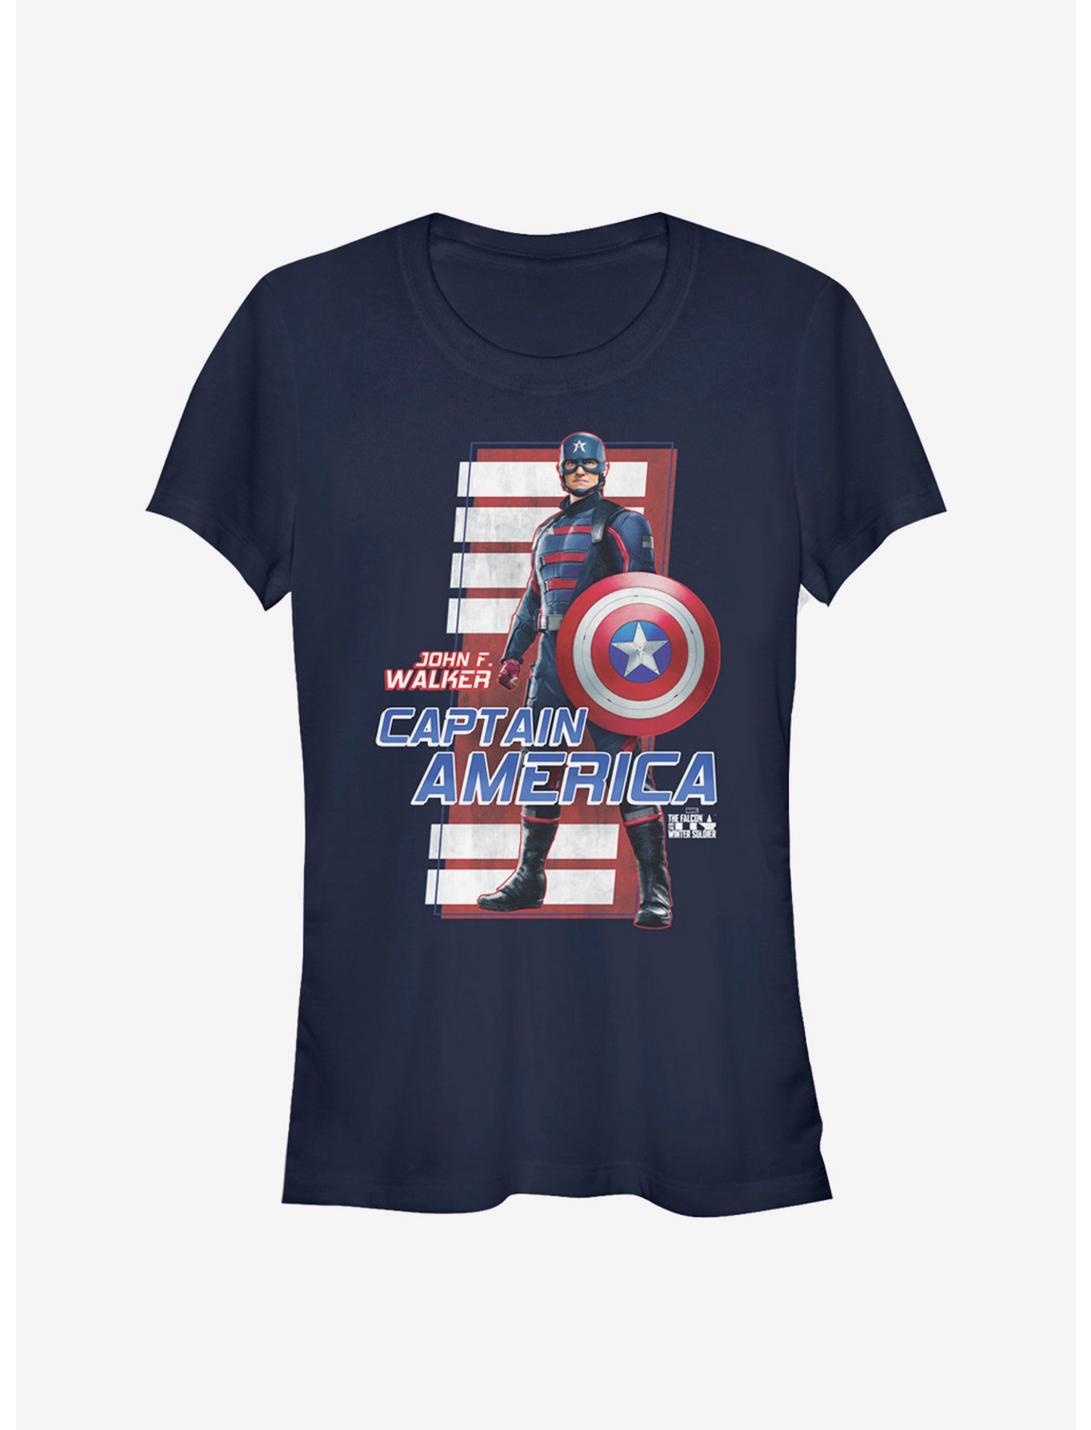 Marvel The Falcon And The Winter Soldier John F. Walker Girls T-Shirt, NAVY, hi-res